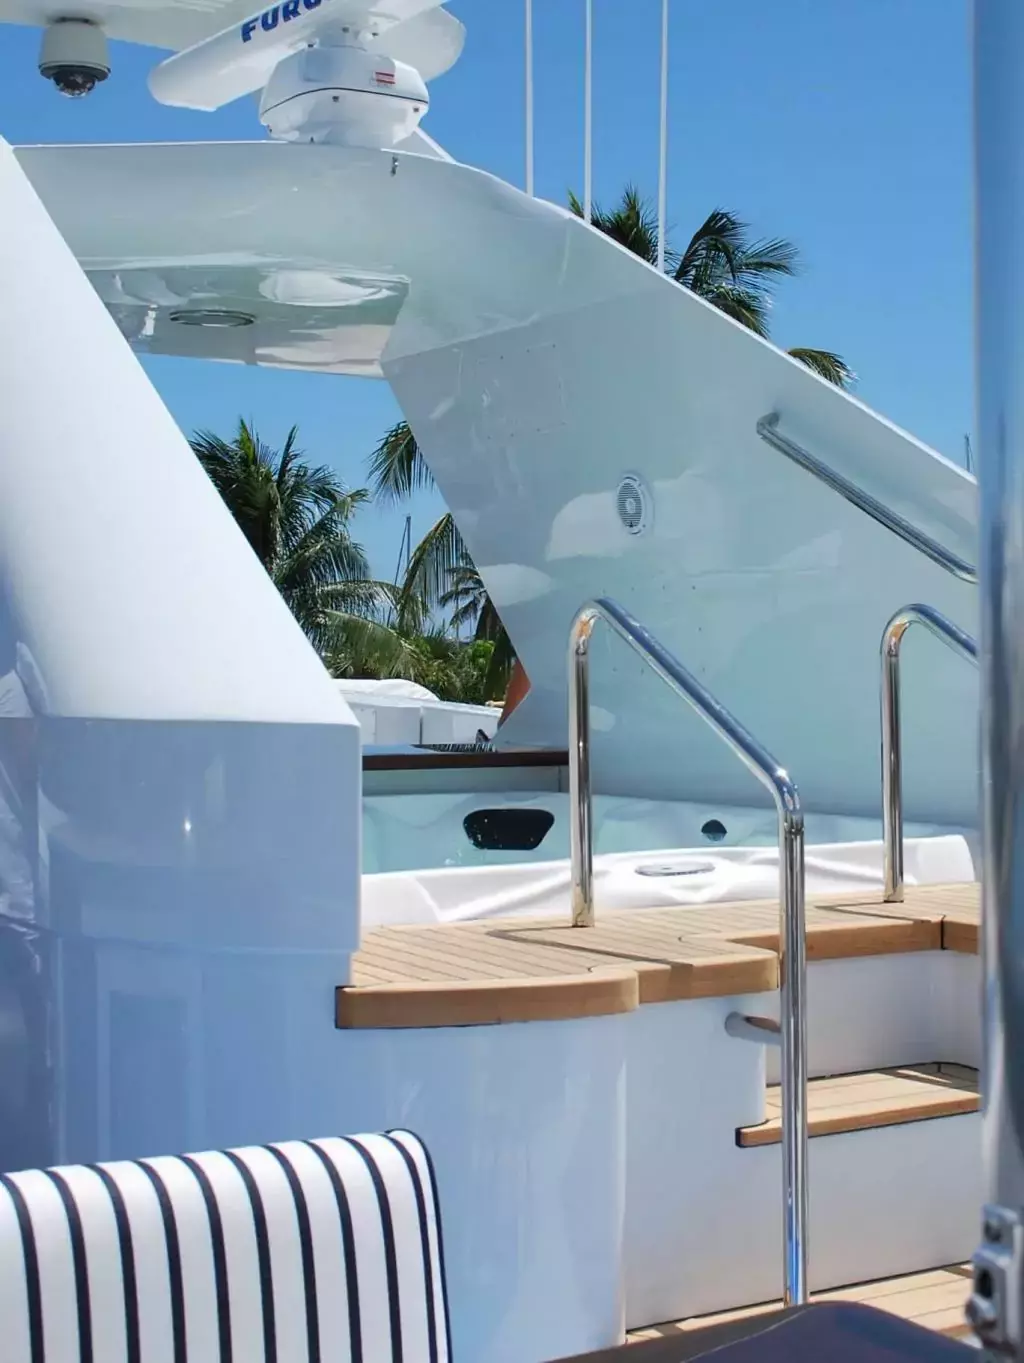 Themis by Trinity Yachts - Top rates for a Charter of a private Superyacht in Aruba